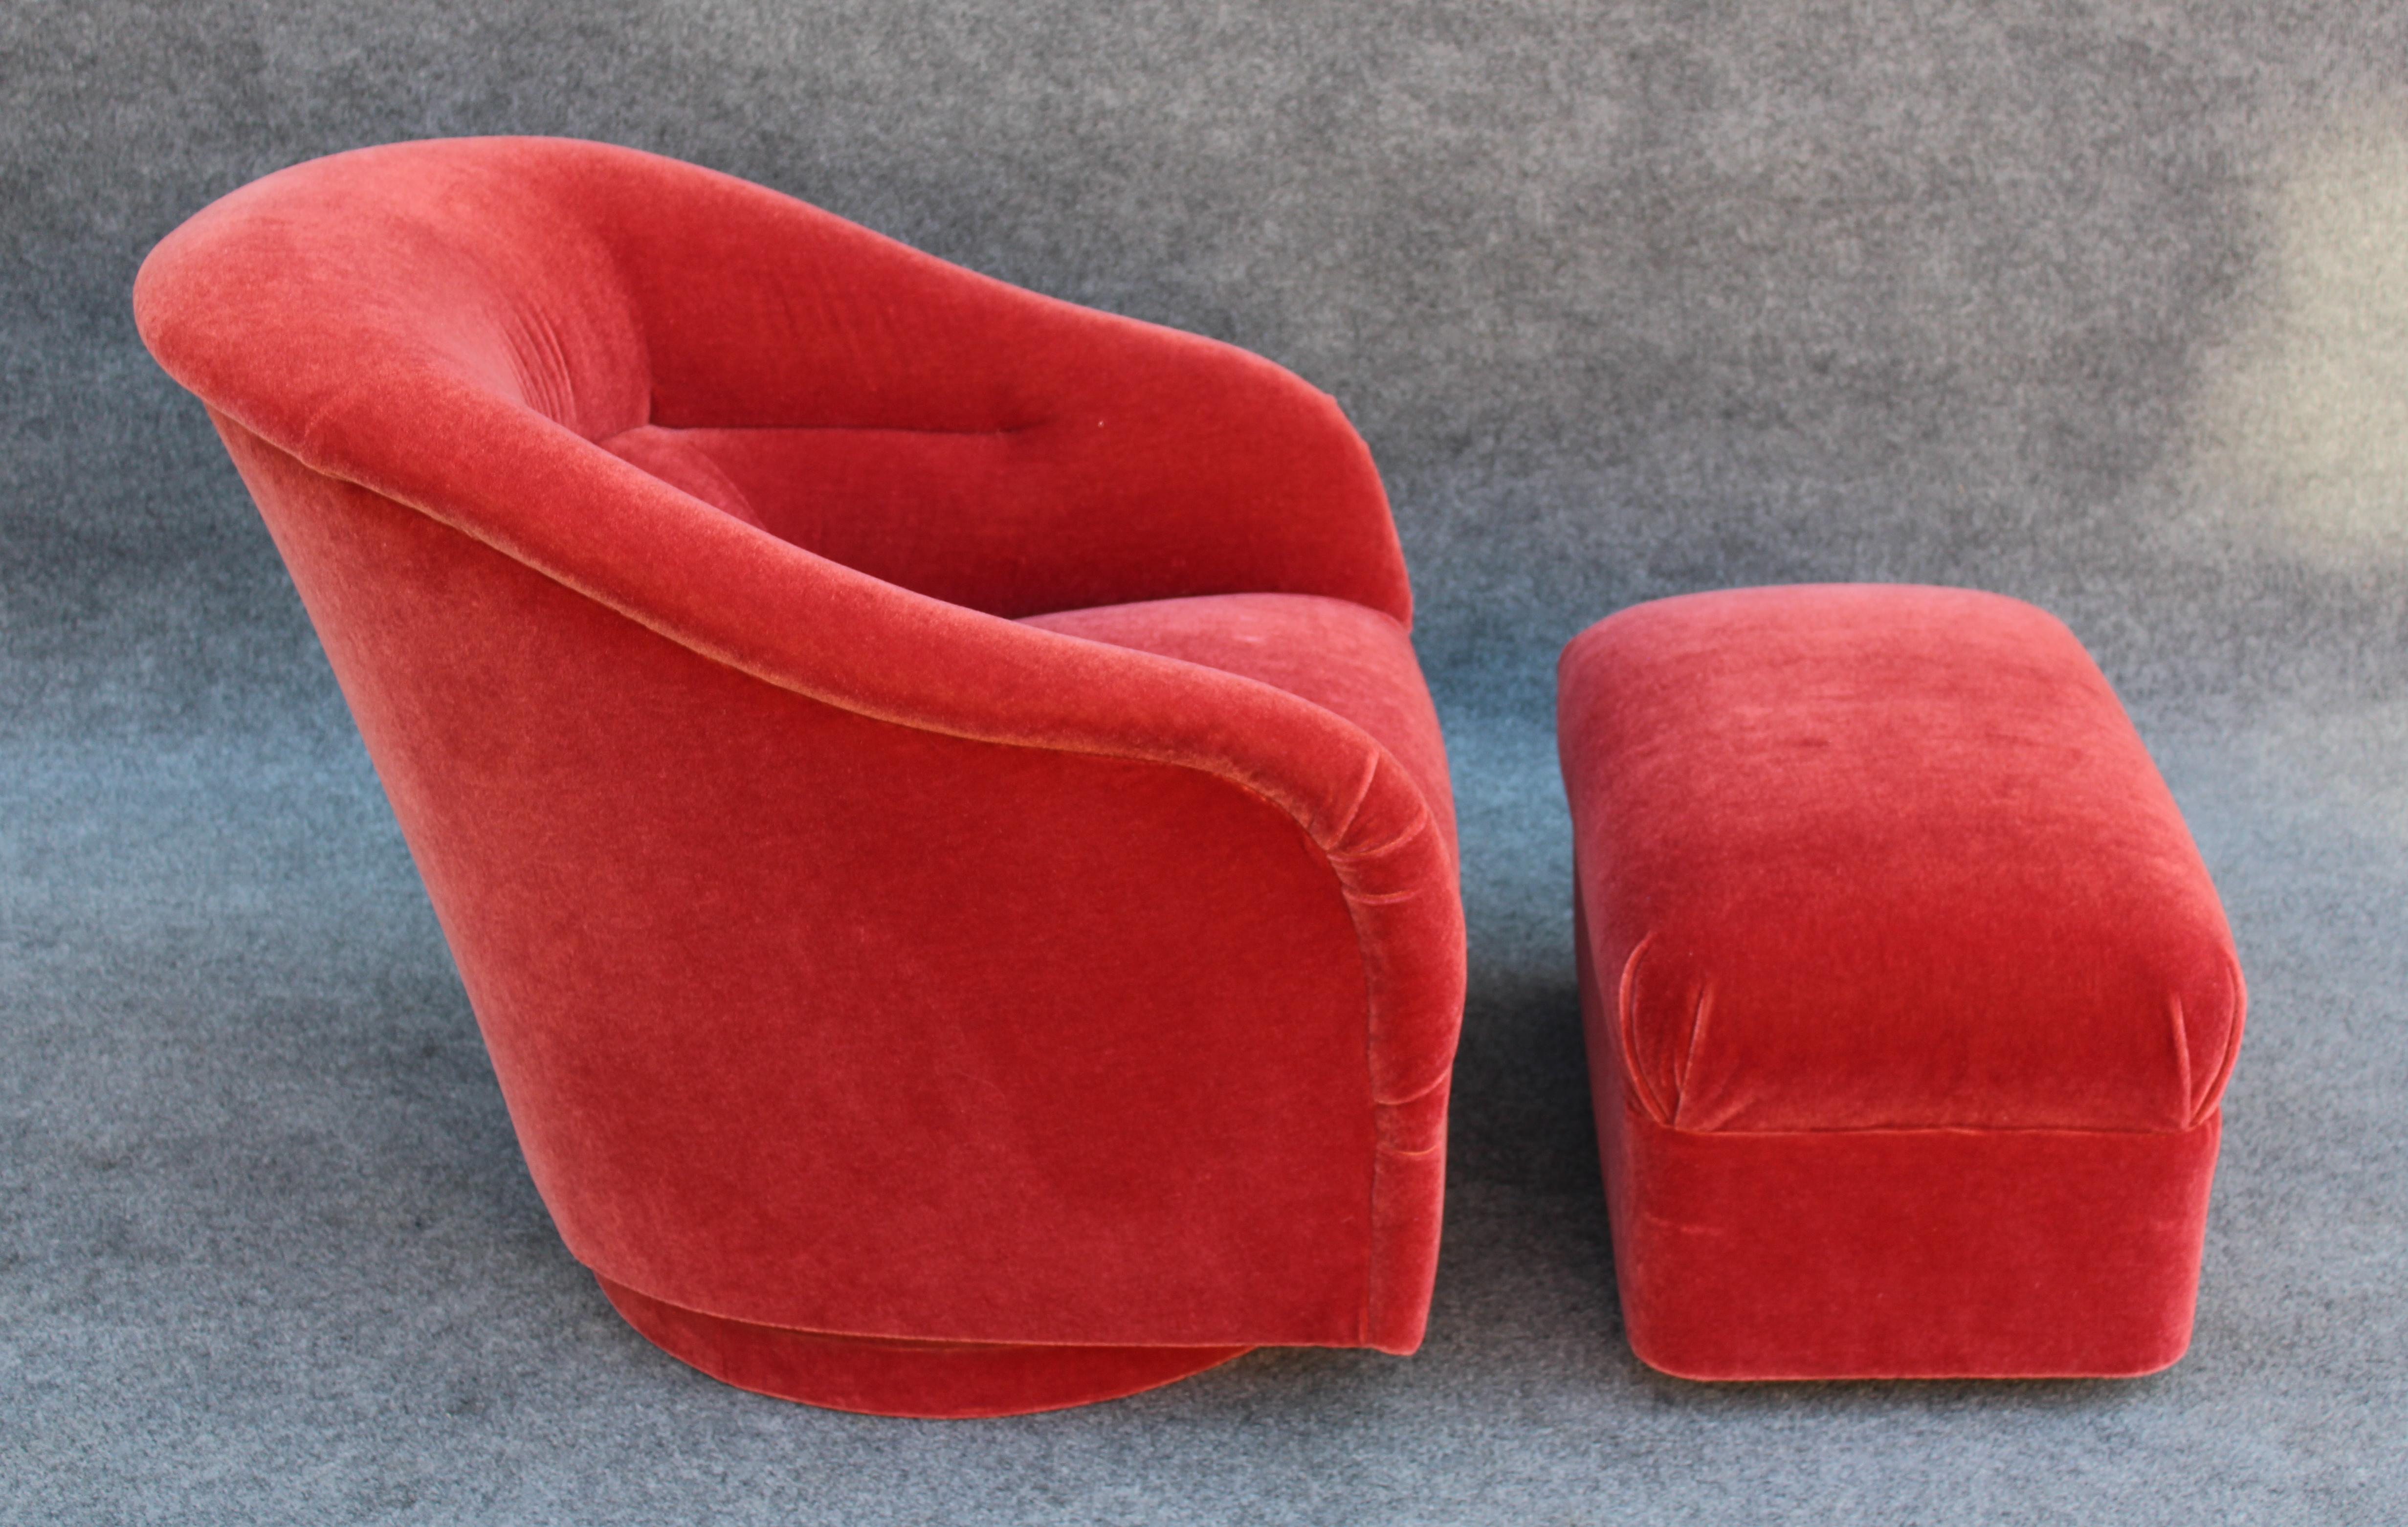 Designed in the 1960s by American icon Ward Bennett, this lounge chair and ottoman was produced by Brickel. This example is quite special, featuring the rarely seen ottoman. Where many other pieces are reupholstered, this chair features its original